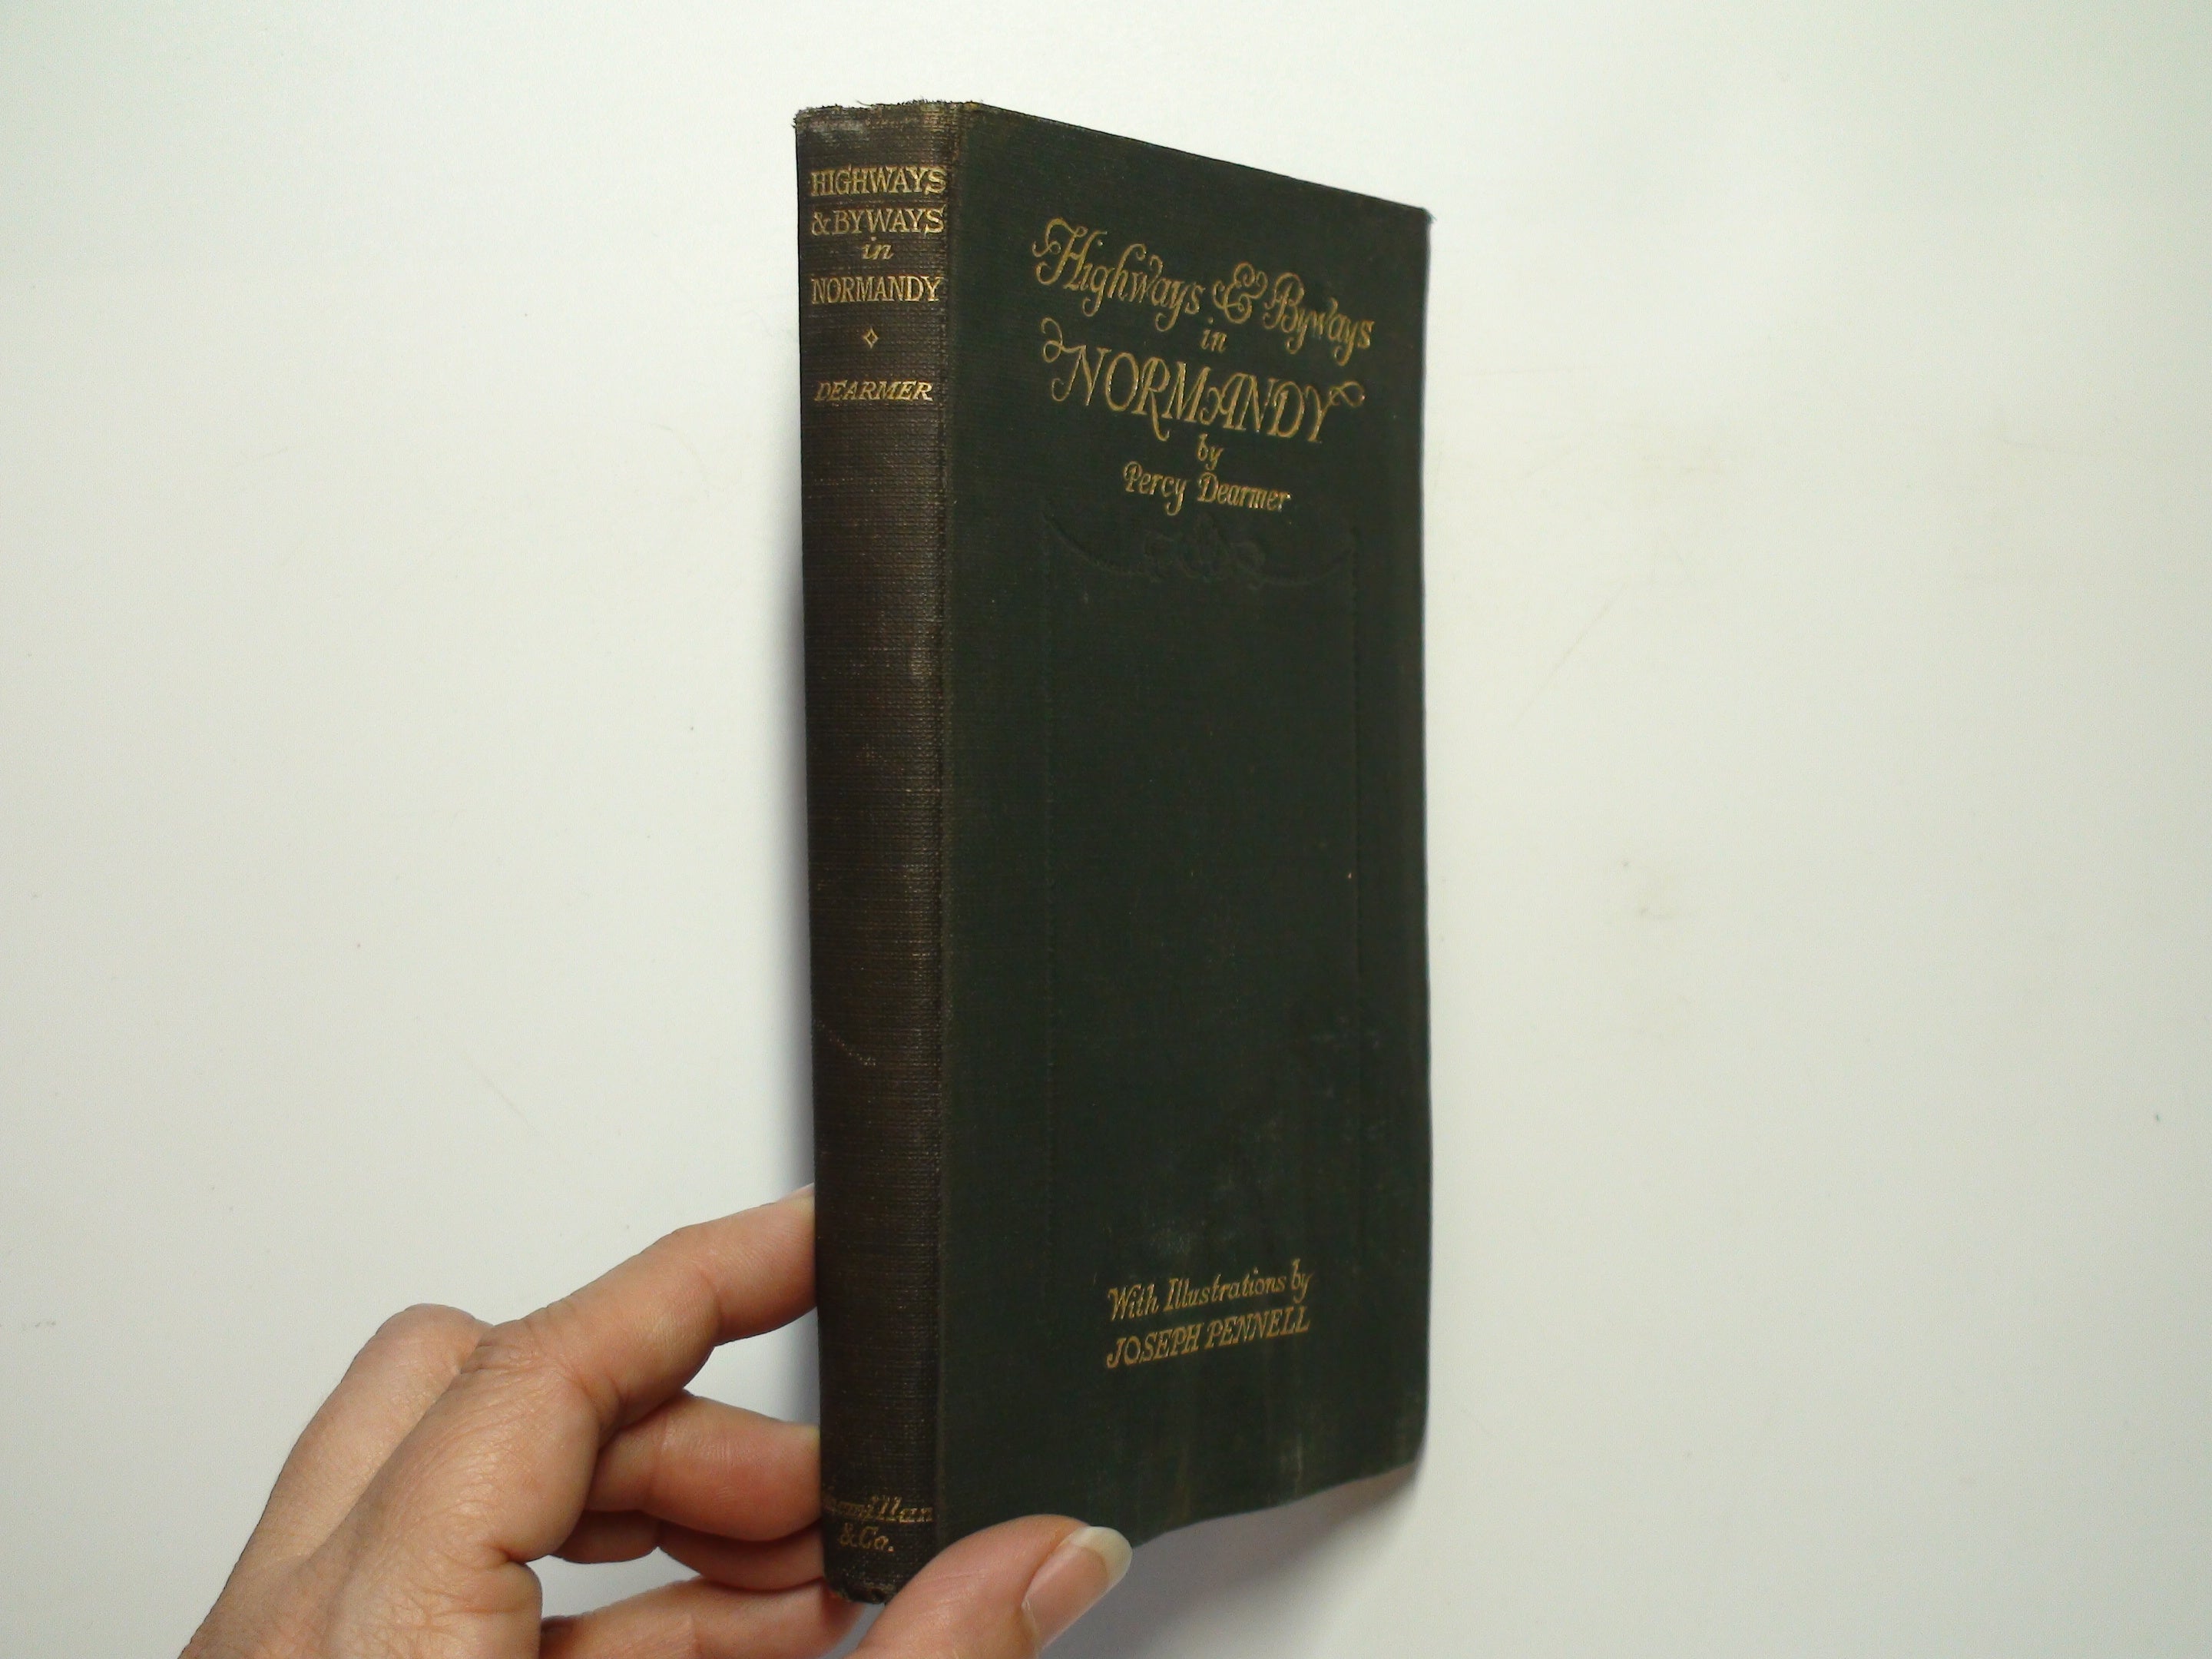 Highways and Byways in Normandy by Percy Dearmer, Illustrated, 1st Ed, 1924